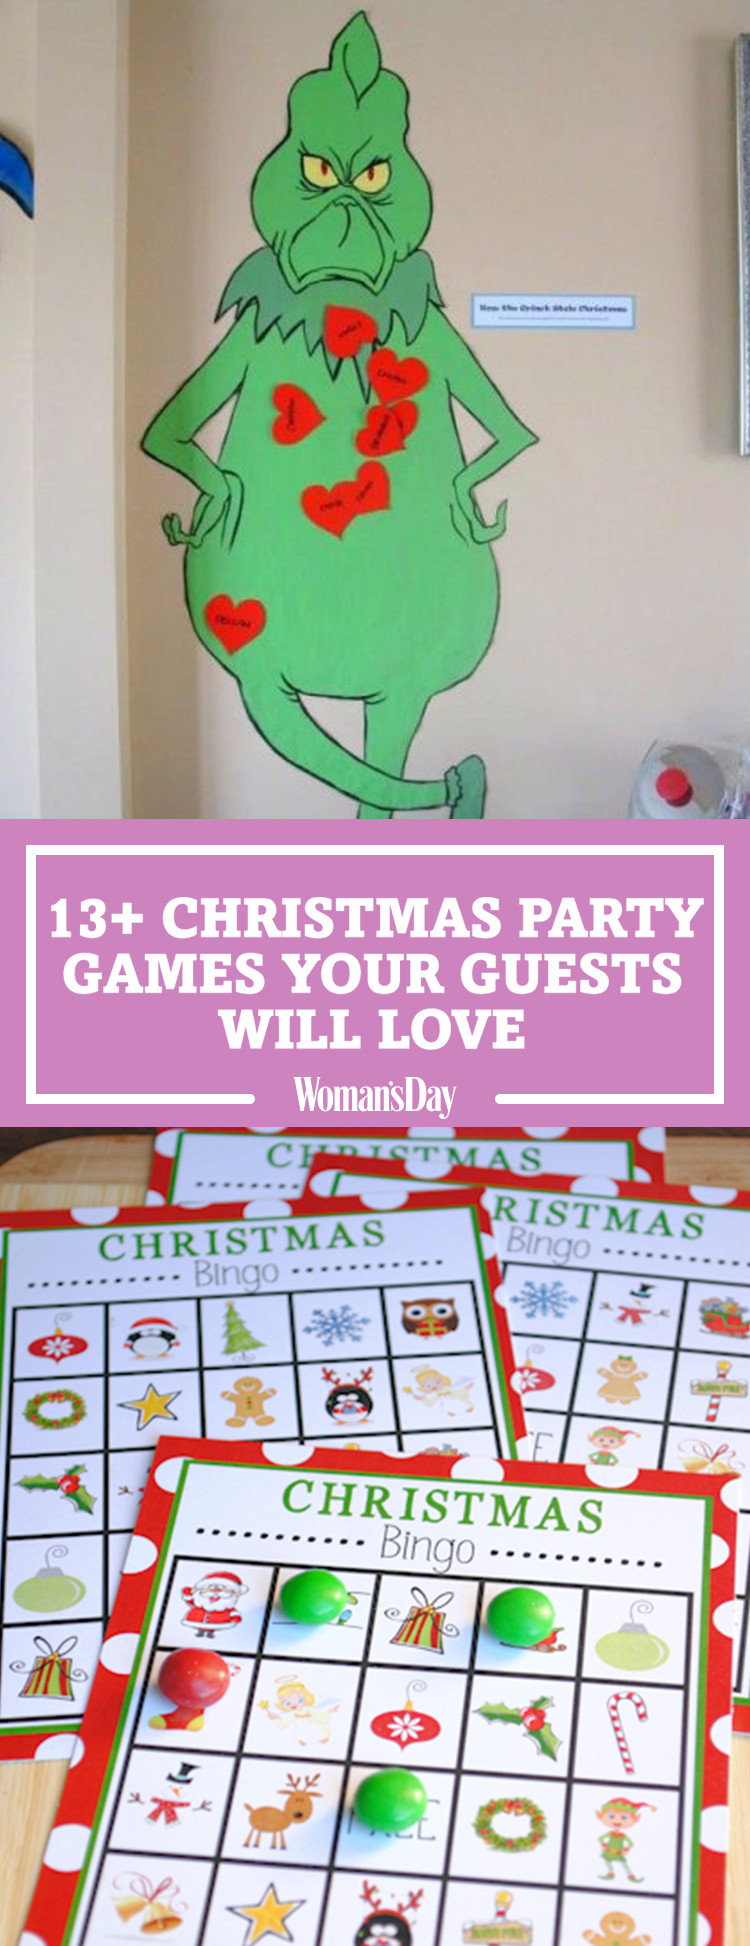 Fun Ideas For Holiday Party
 17 Fun Christmas Party Games for Kids DIY Holiday Party